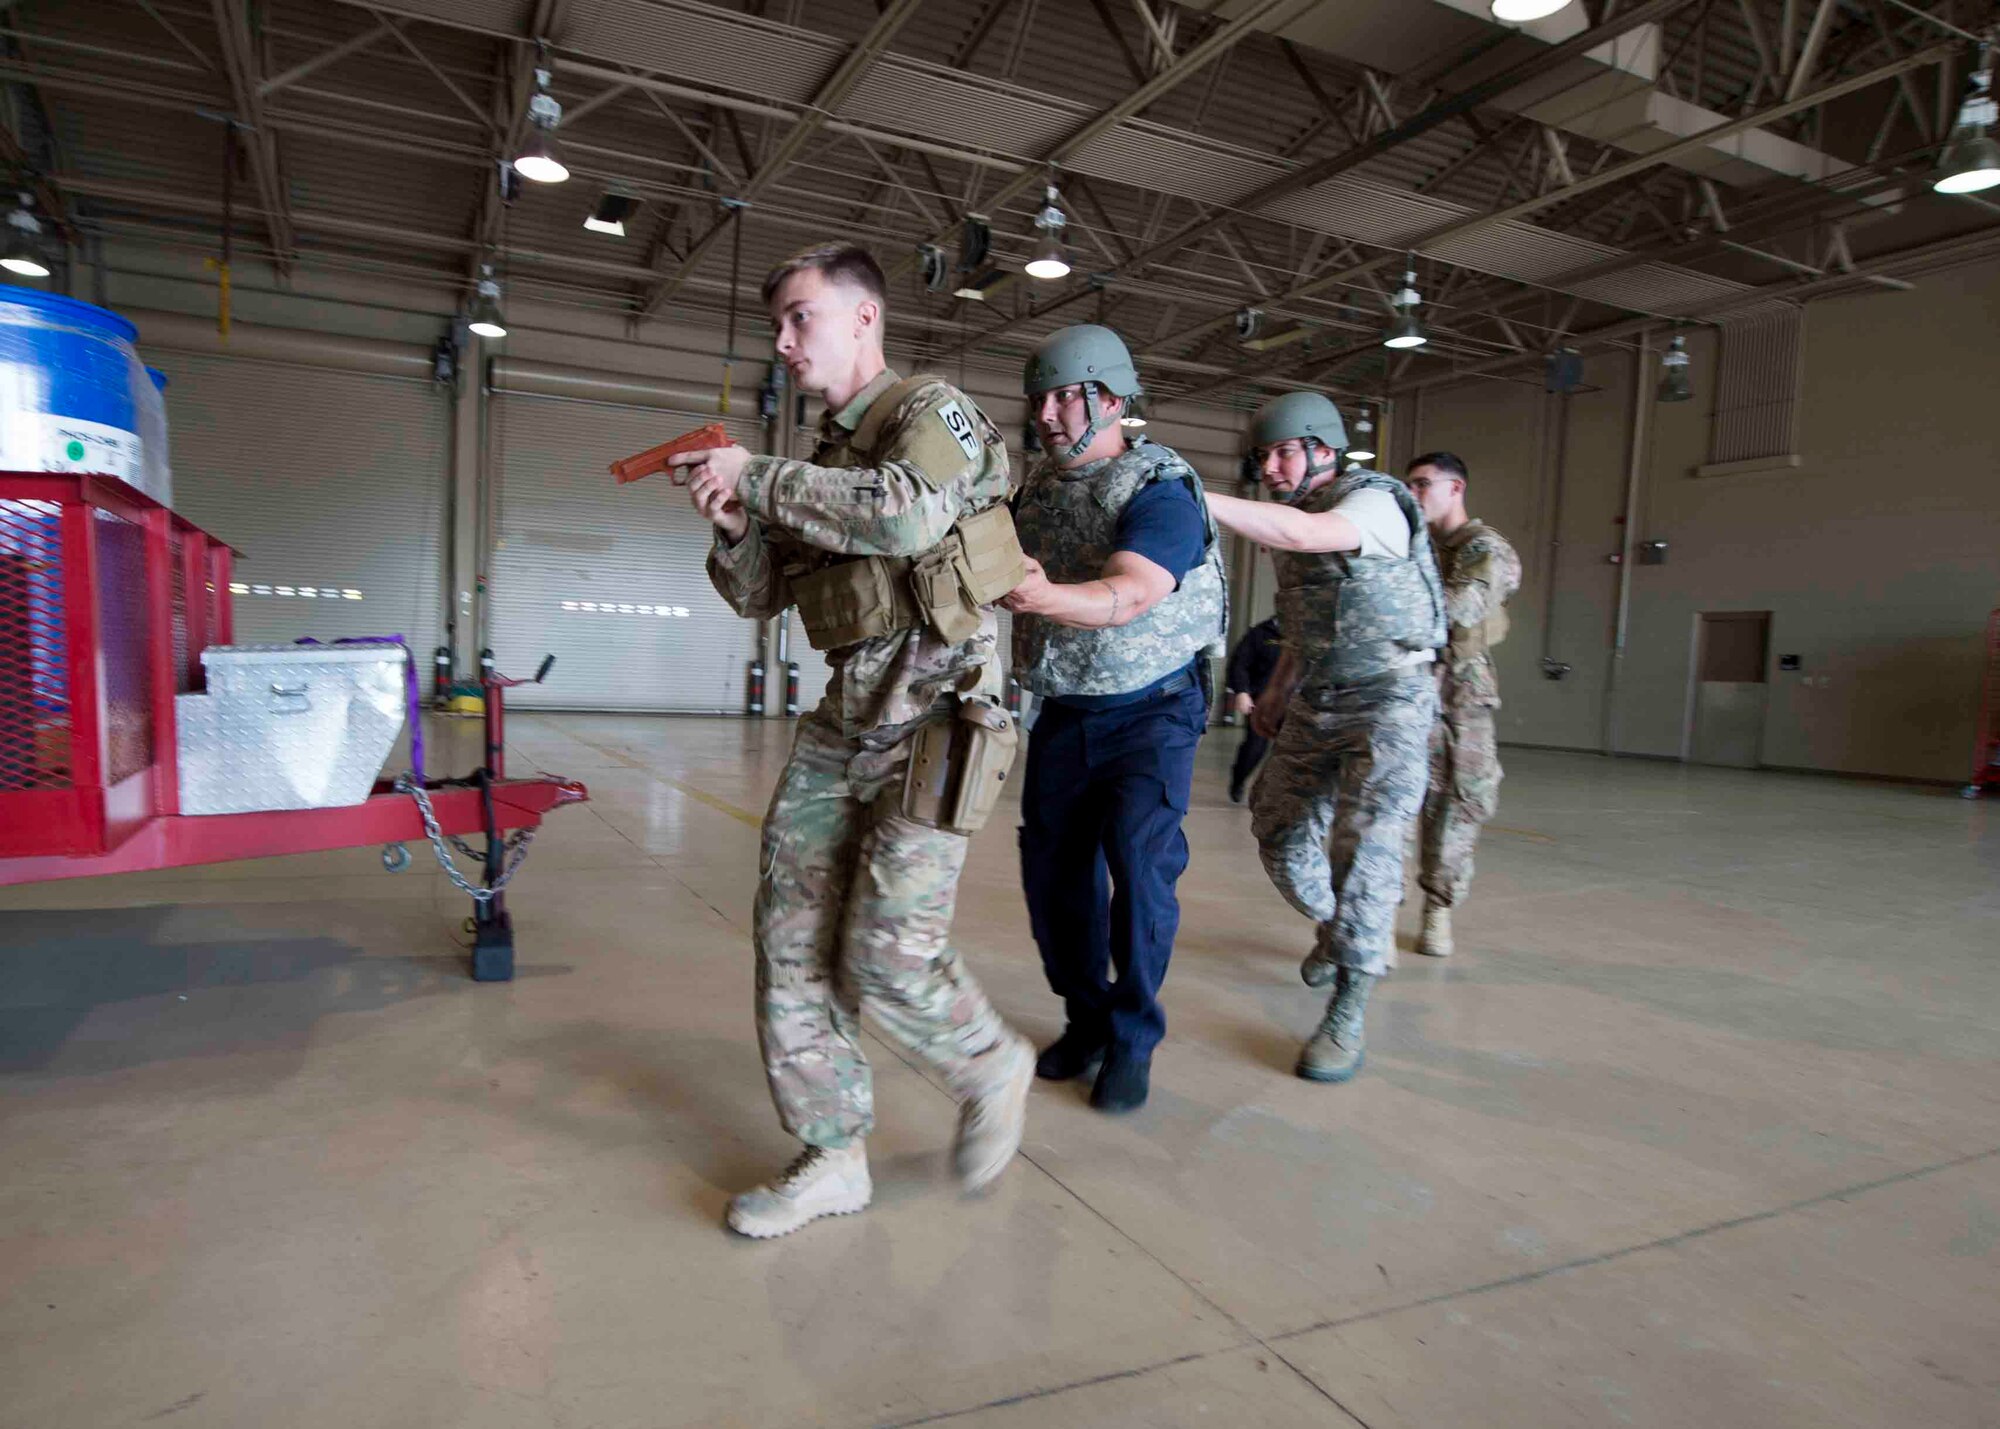 Air Commandos with the 1st Special Operations Security Forces Squadron and the 1st Special Operations Civil Engineer Squadron perform first responder duties during an active shooter exercise at Hurlburt Field, Fla., March 10, 2017. Air Commandos with the 1st Special Operations Security Forces Squadron, 1st SOCES and the 1st Special Operations Medical Group participated in an exercise to practice new procedures for tactical responders. (U.S. Air Force photo by Senior Airman Krystal M. Garrett)